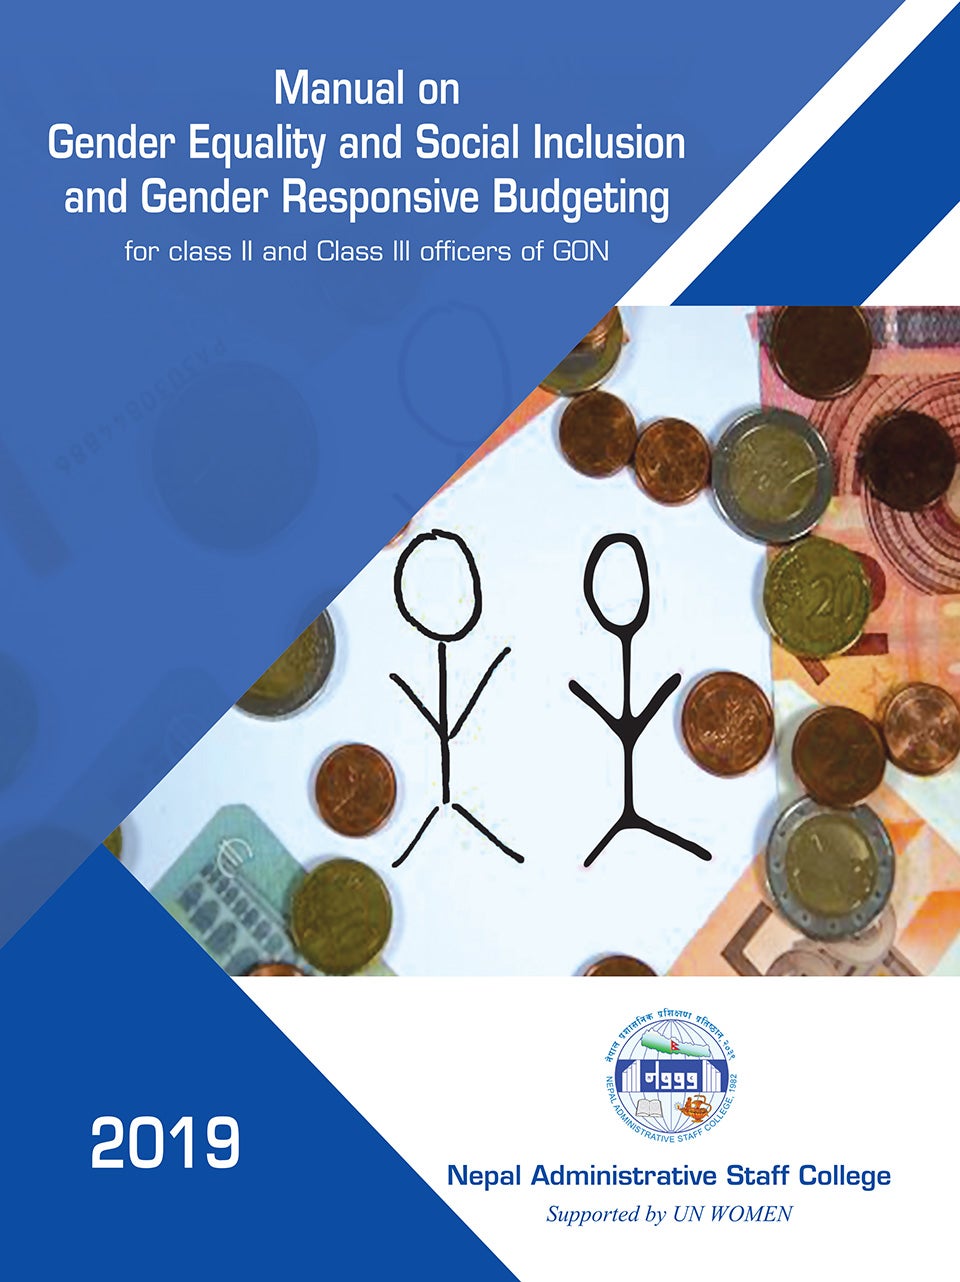 Manual On Gender Equality And Social Inclusion And Gender Responsive Budgeting Un Women Asia